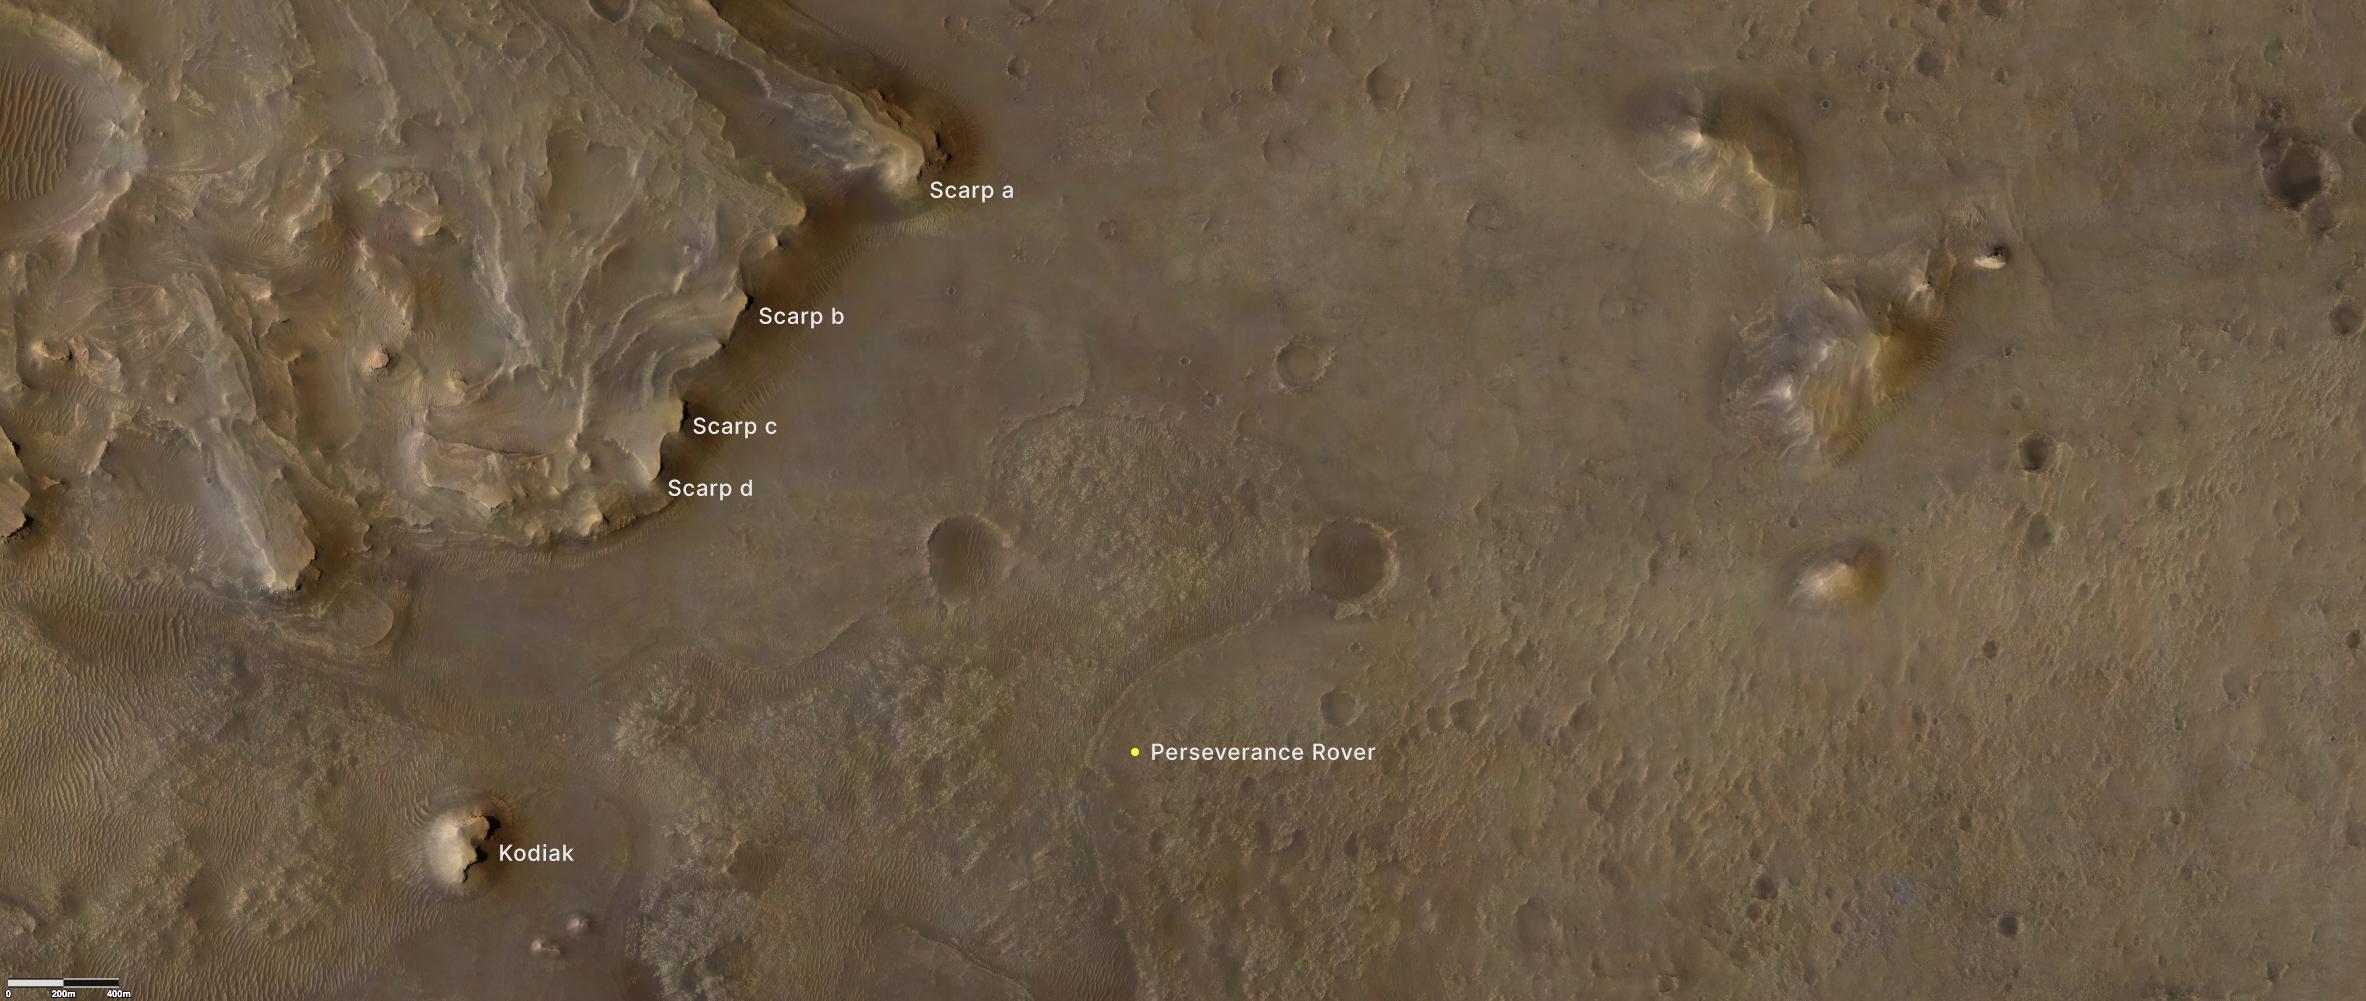 This image indicates the locations of NASAs Perseverance rover, as well as the Kodiak butte and several prominent steep banks known as escarpments, or scarps, along the delta of Jezero Crater.